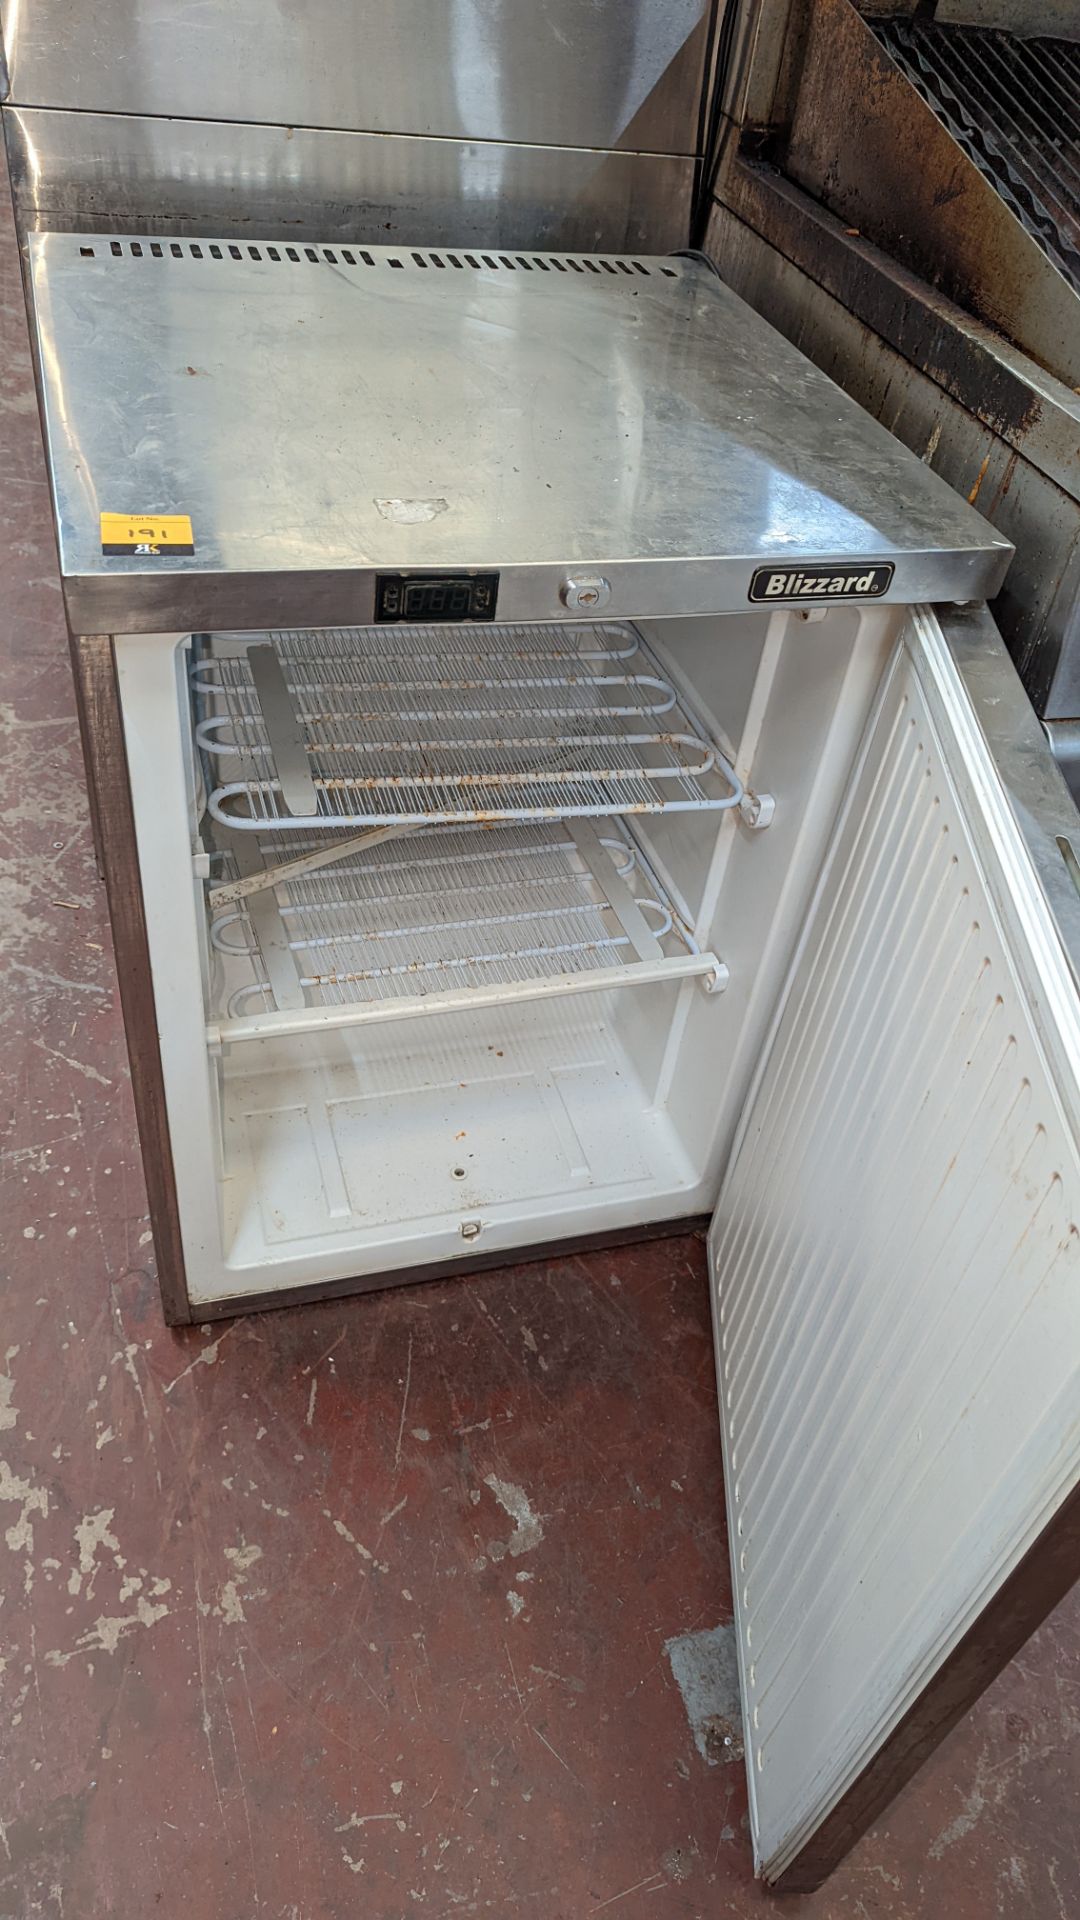 Blizzard stainless steel under counter commercial freezer - Image 4 of 5